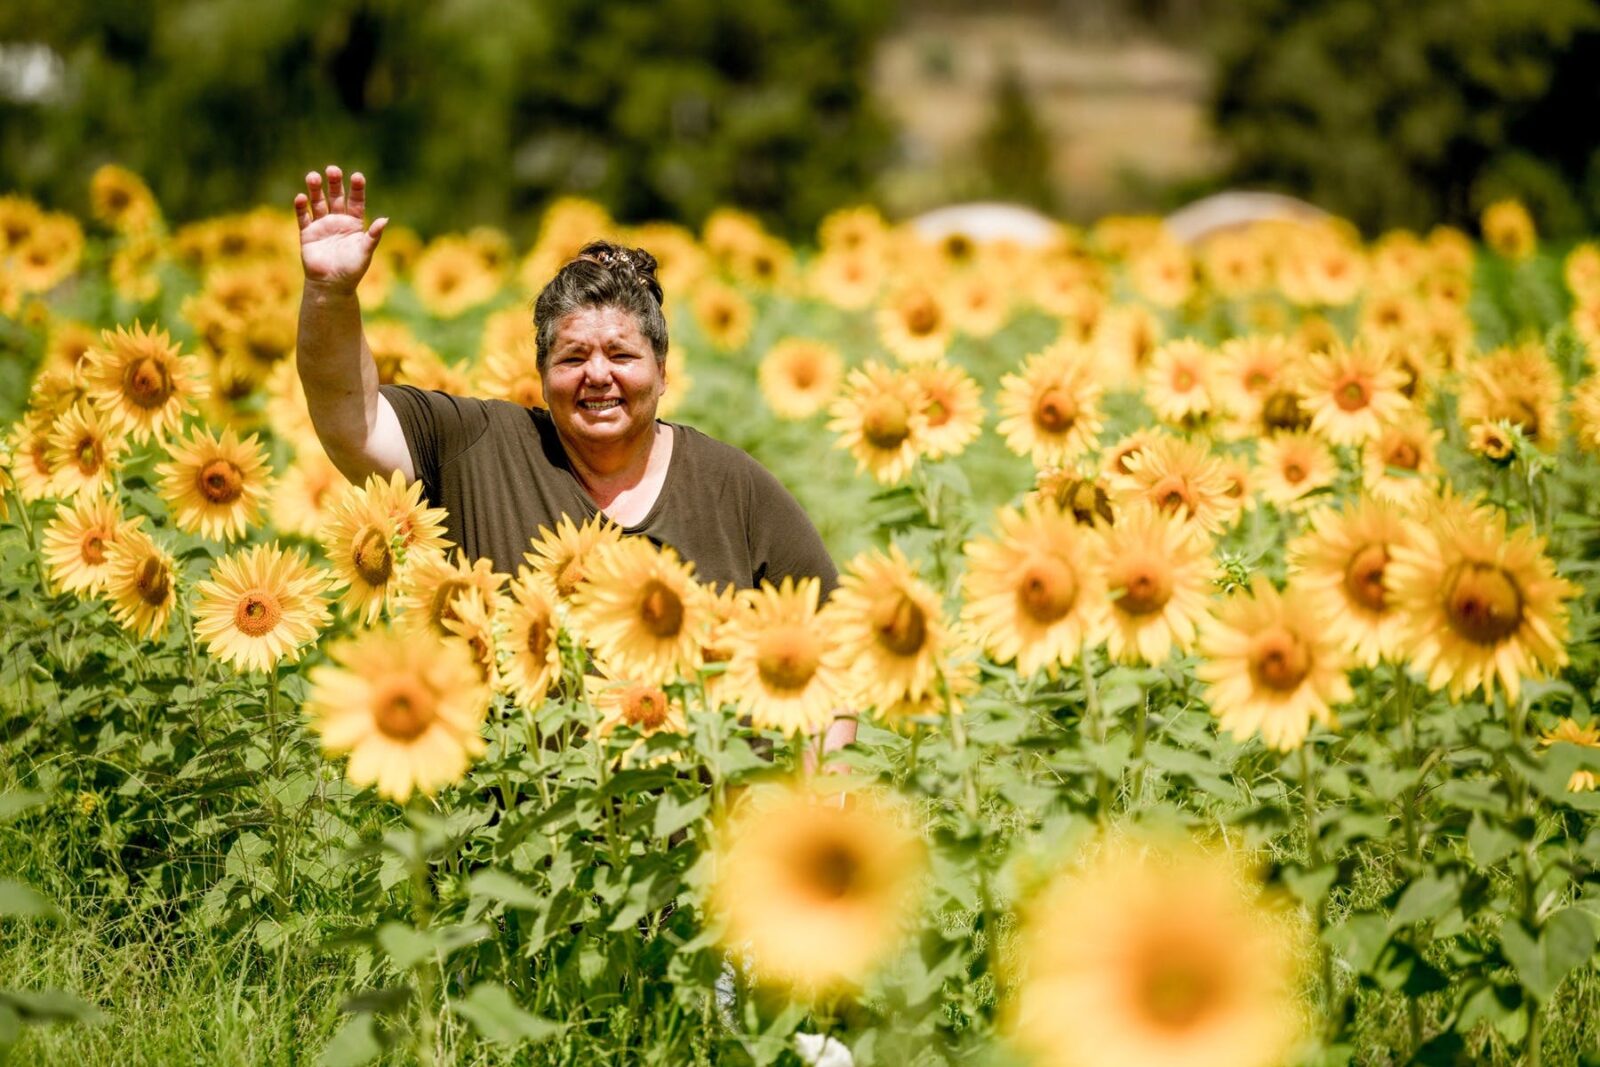 Waving lady surrounded by sunflowers